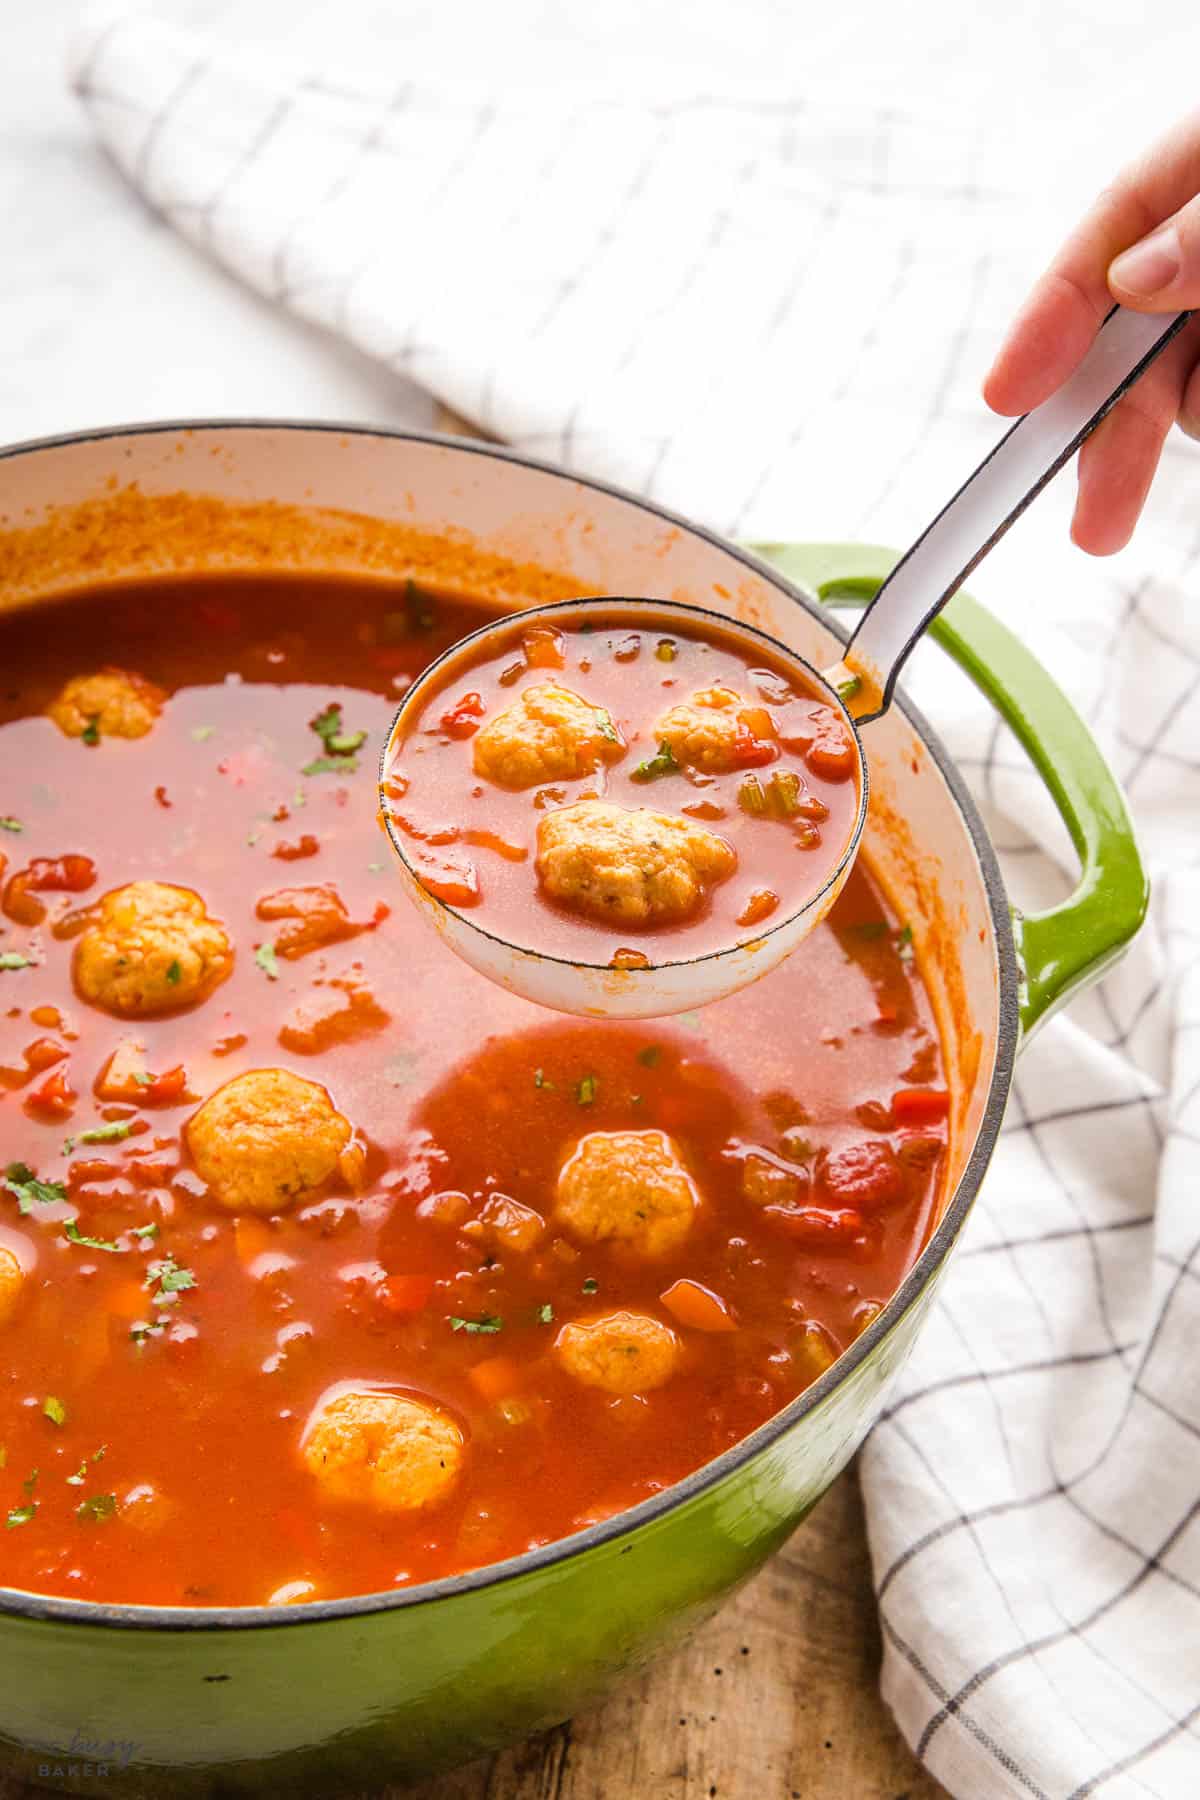 hand serving meatball soup in a soup ladle